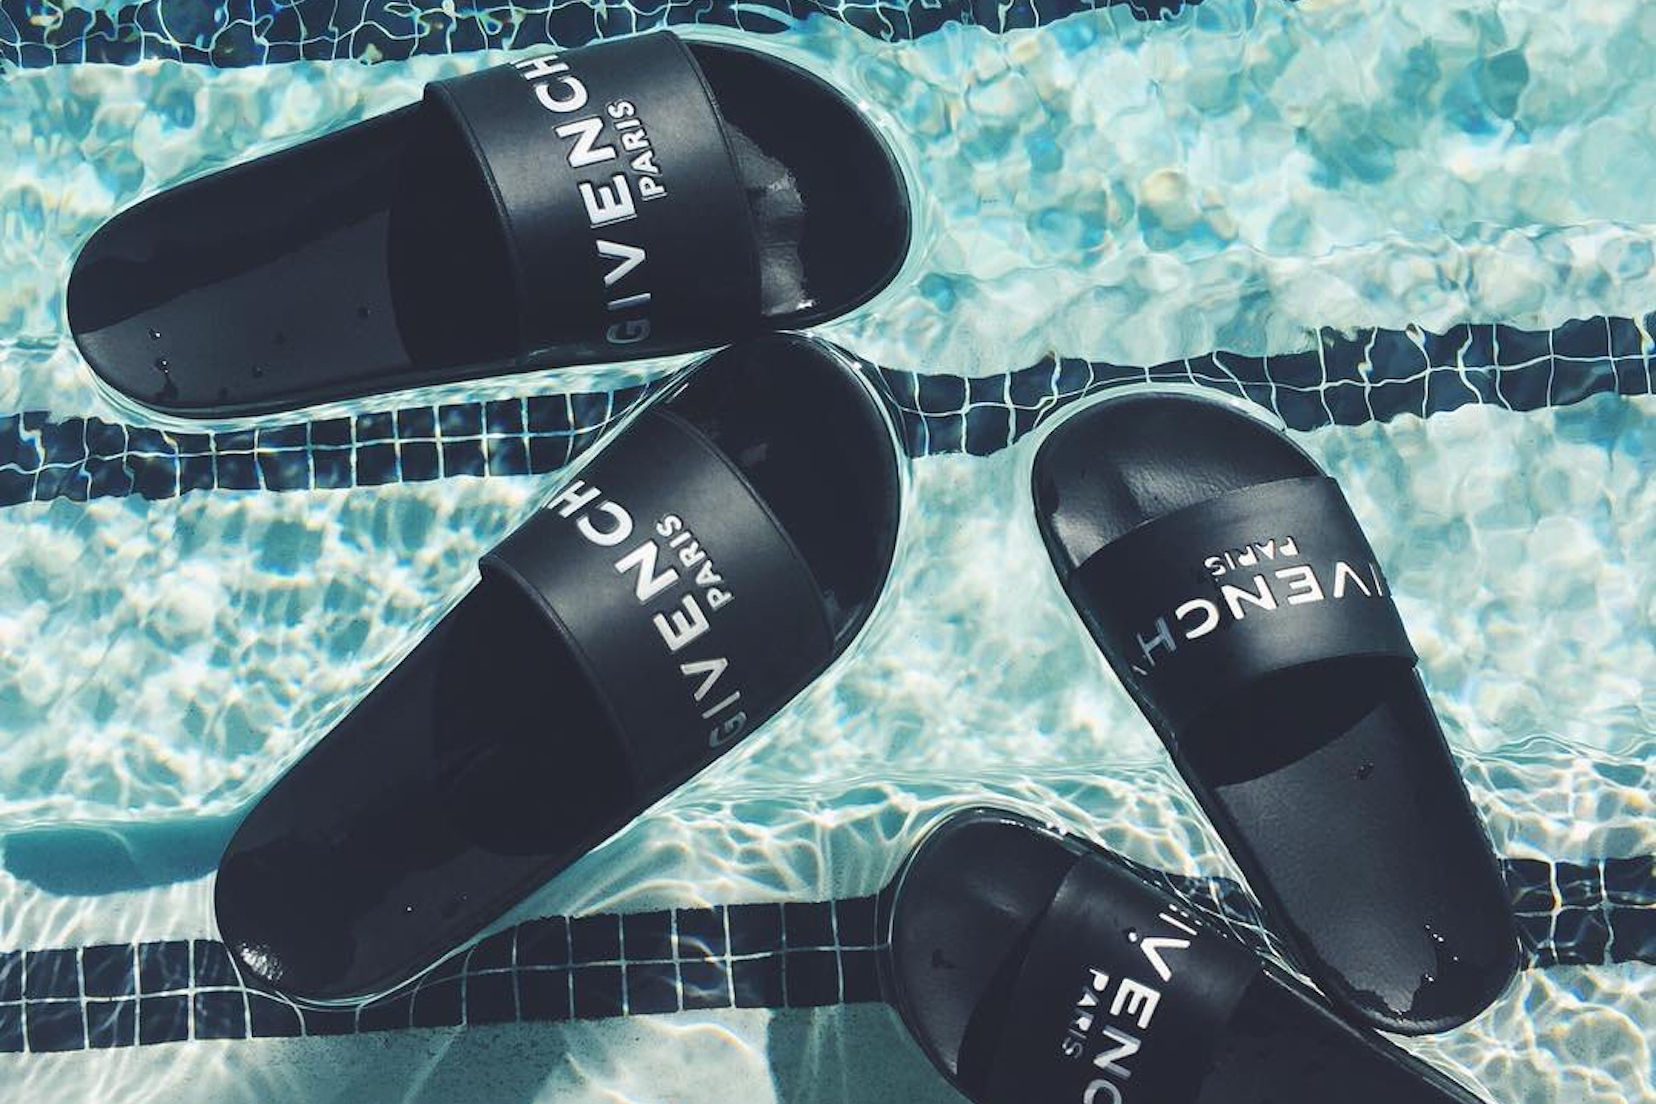 Fashionably chic poolside luxury slides for the summer